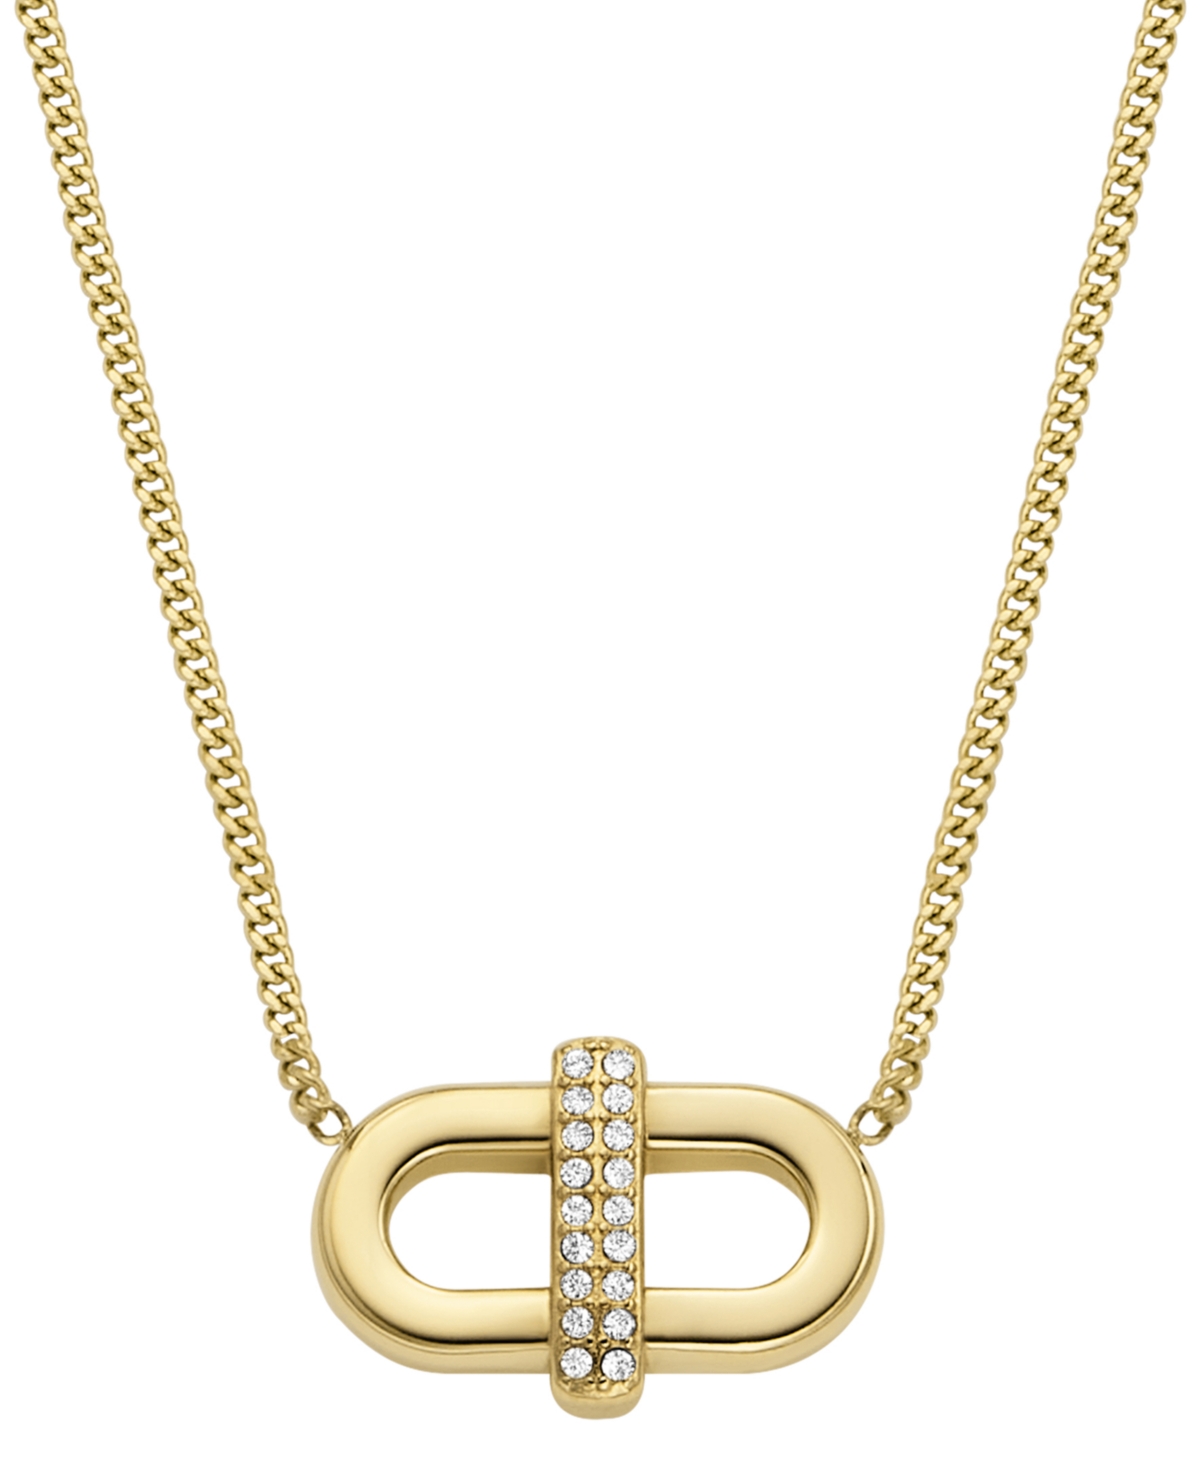 Fossil Heritage D-link Glitz Gold-tone Stainless Steel Chain Necklace